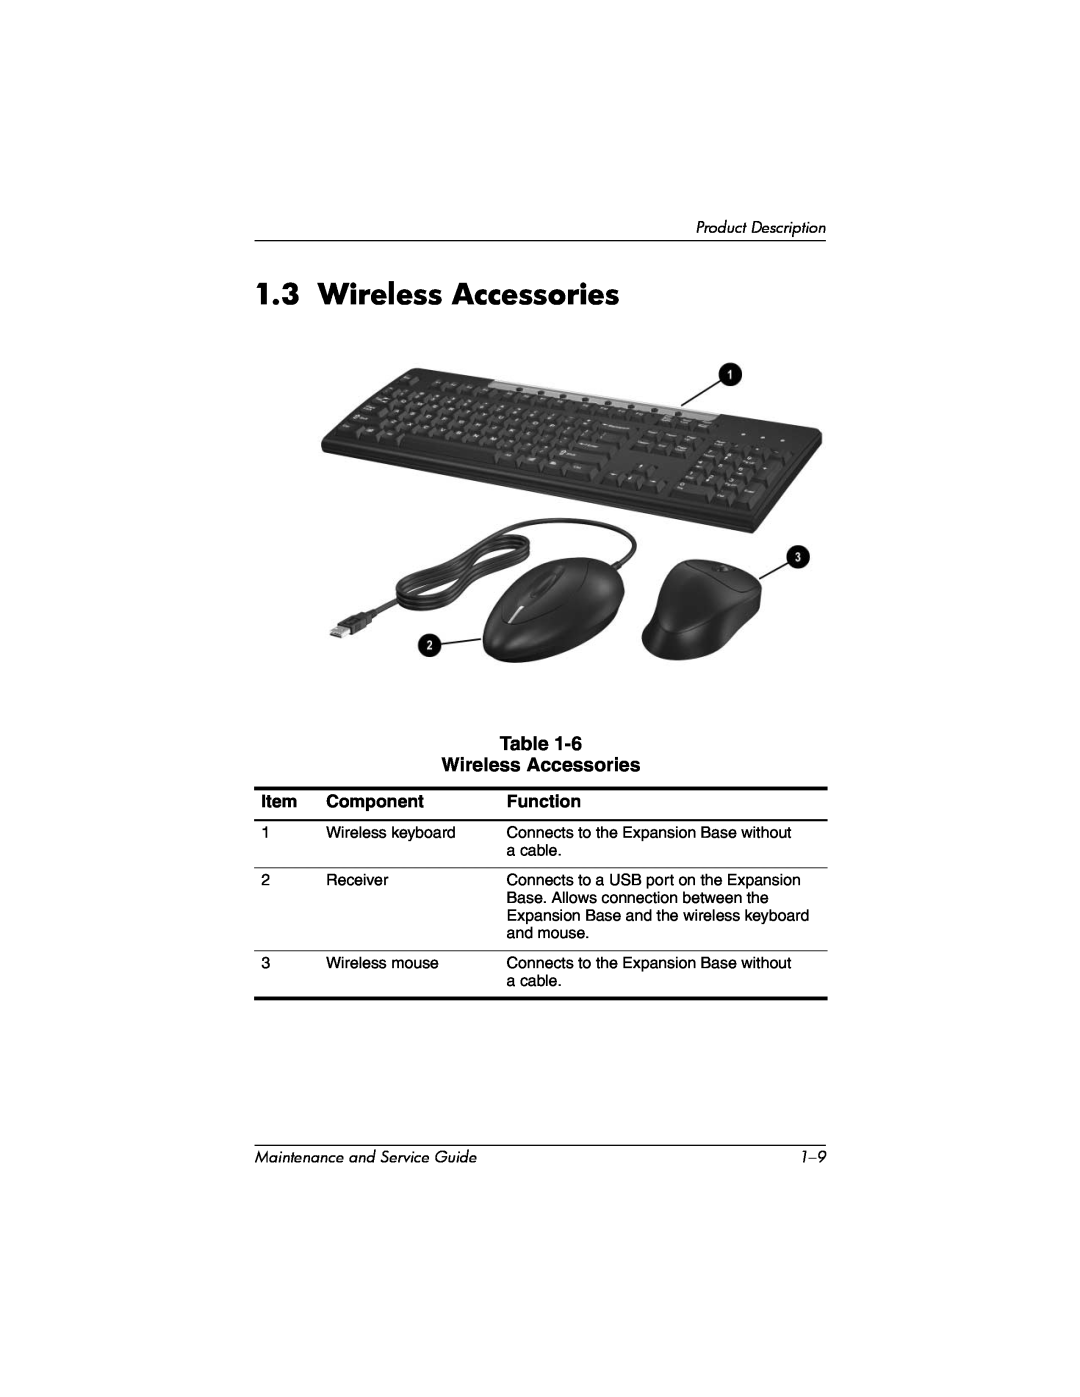 HP R3001US, R3065US, R3070US Wireless Accessories, Component, Function, Product Description, Maintenance and Service Guide 